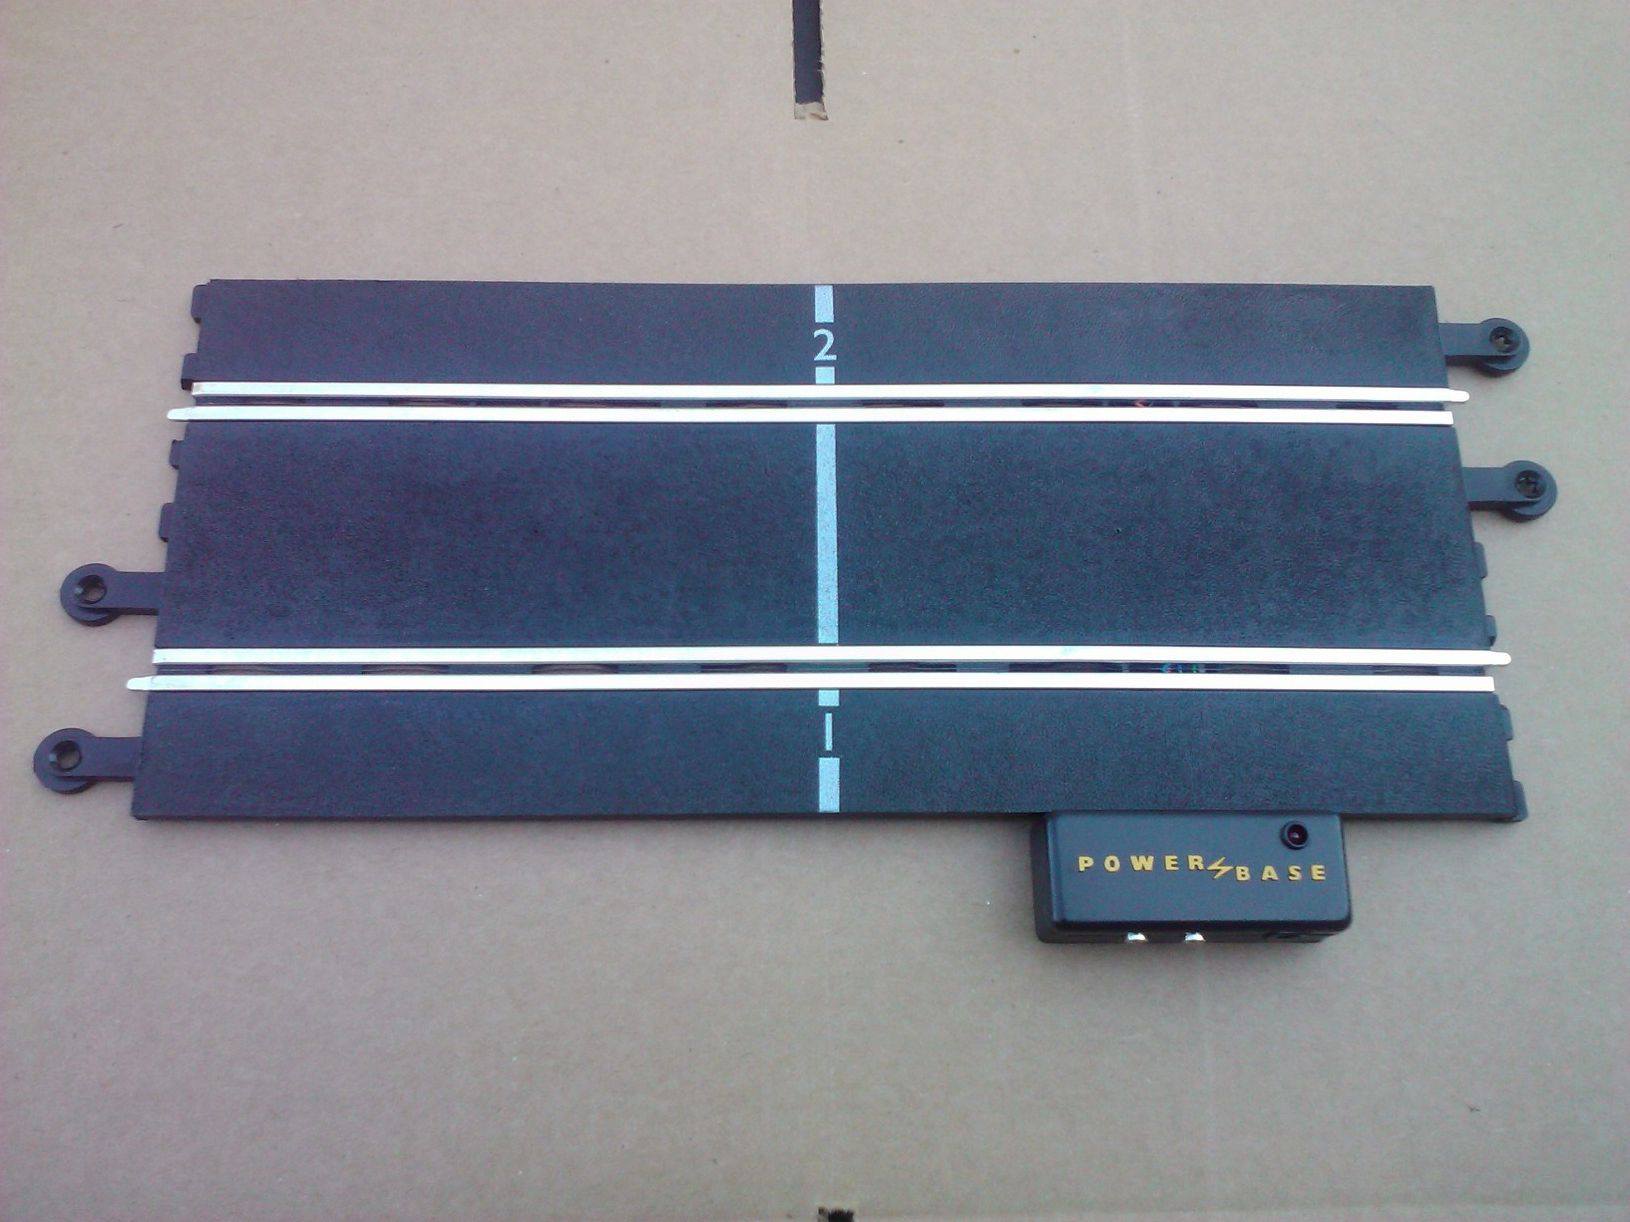 30 Scalextric Classic Track Supports Black Banking Wedges C710 for sale online 